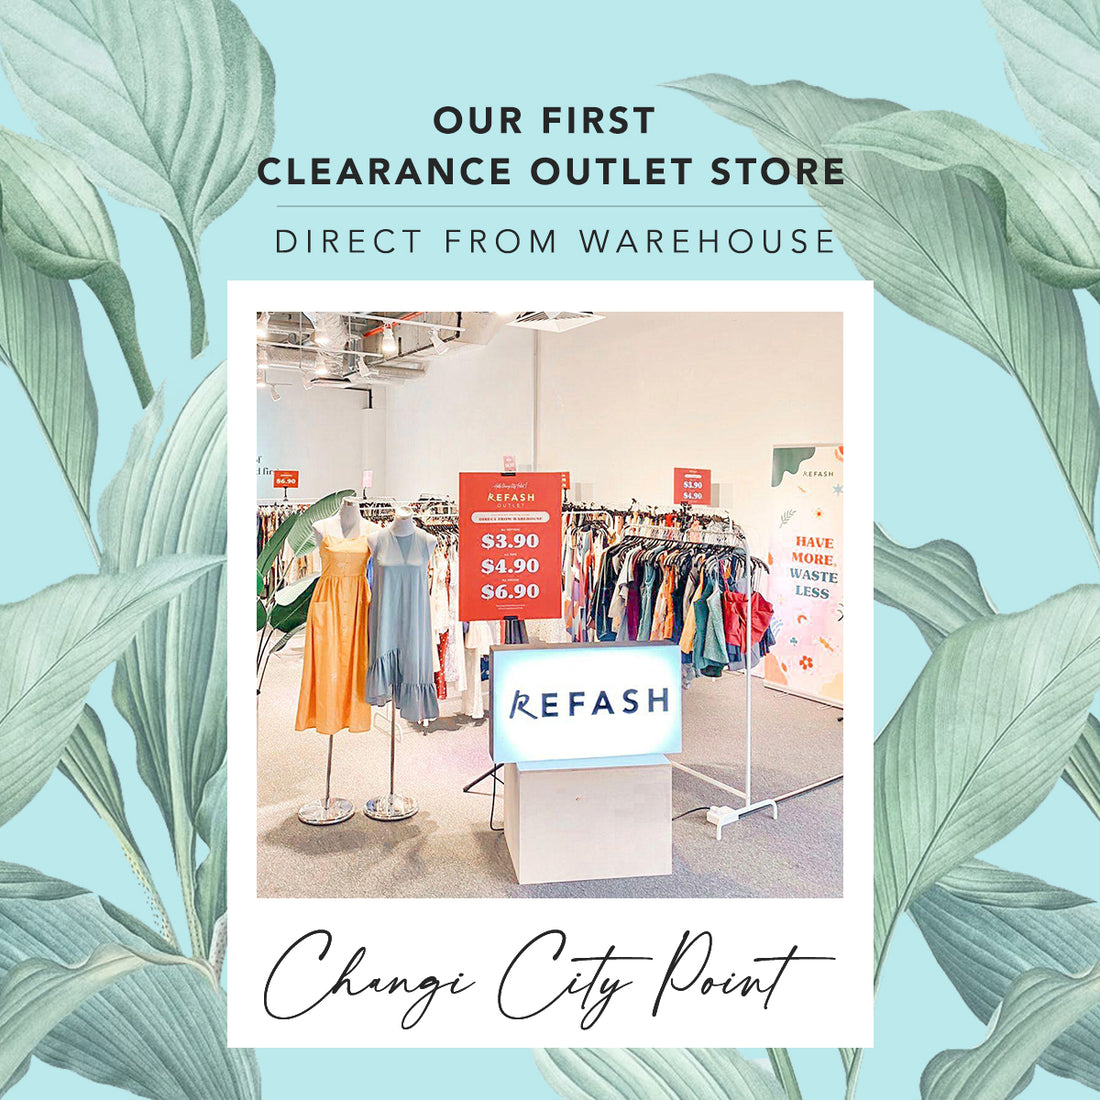 OUR FIRST CLEARANCE OUTLET STORE: CHANGI CITY POINT